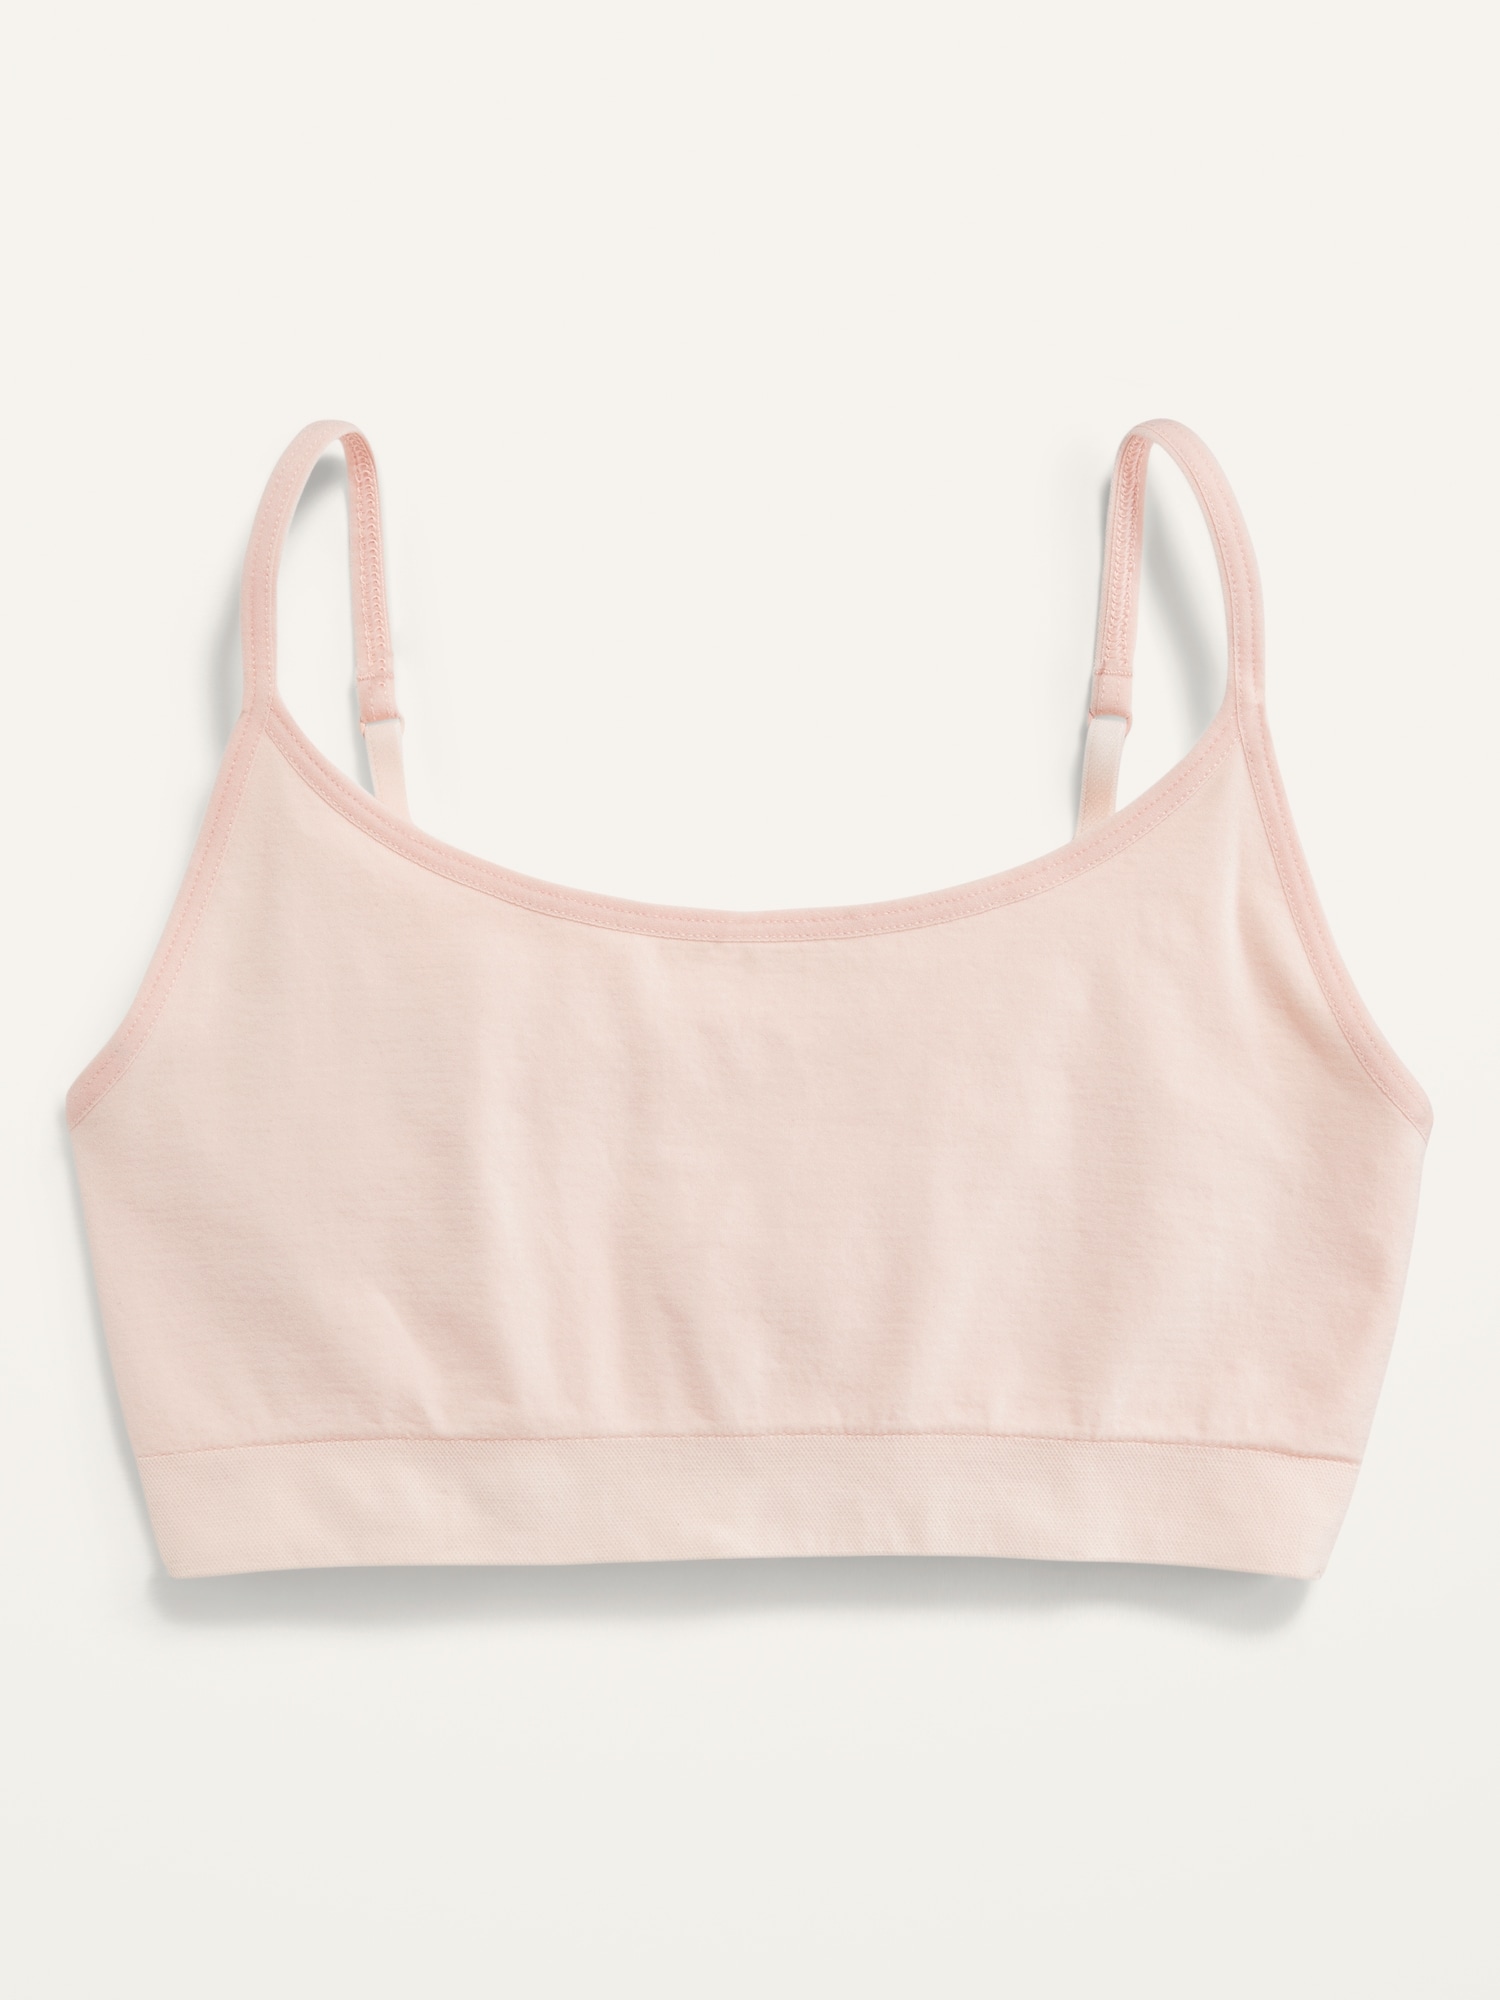 Old Navy Seamless Cami Bralette Top for Women pink. 1